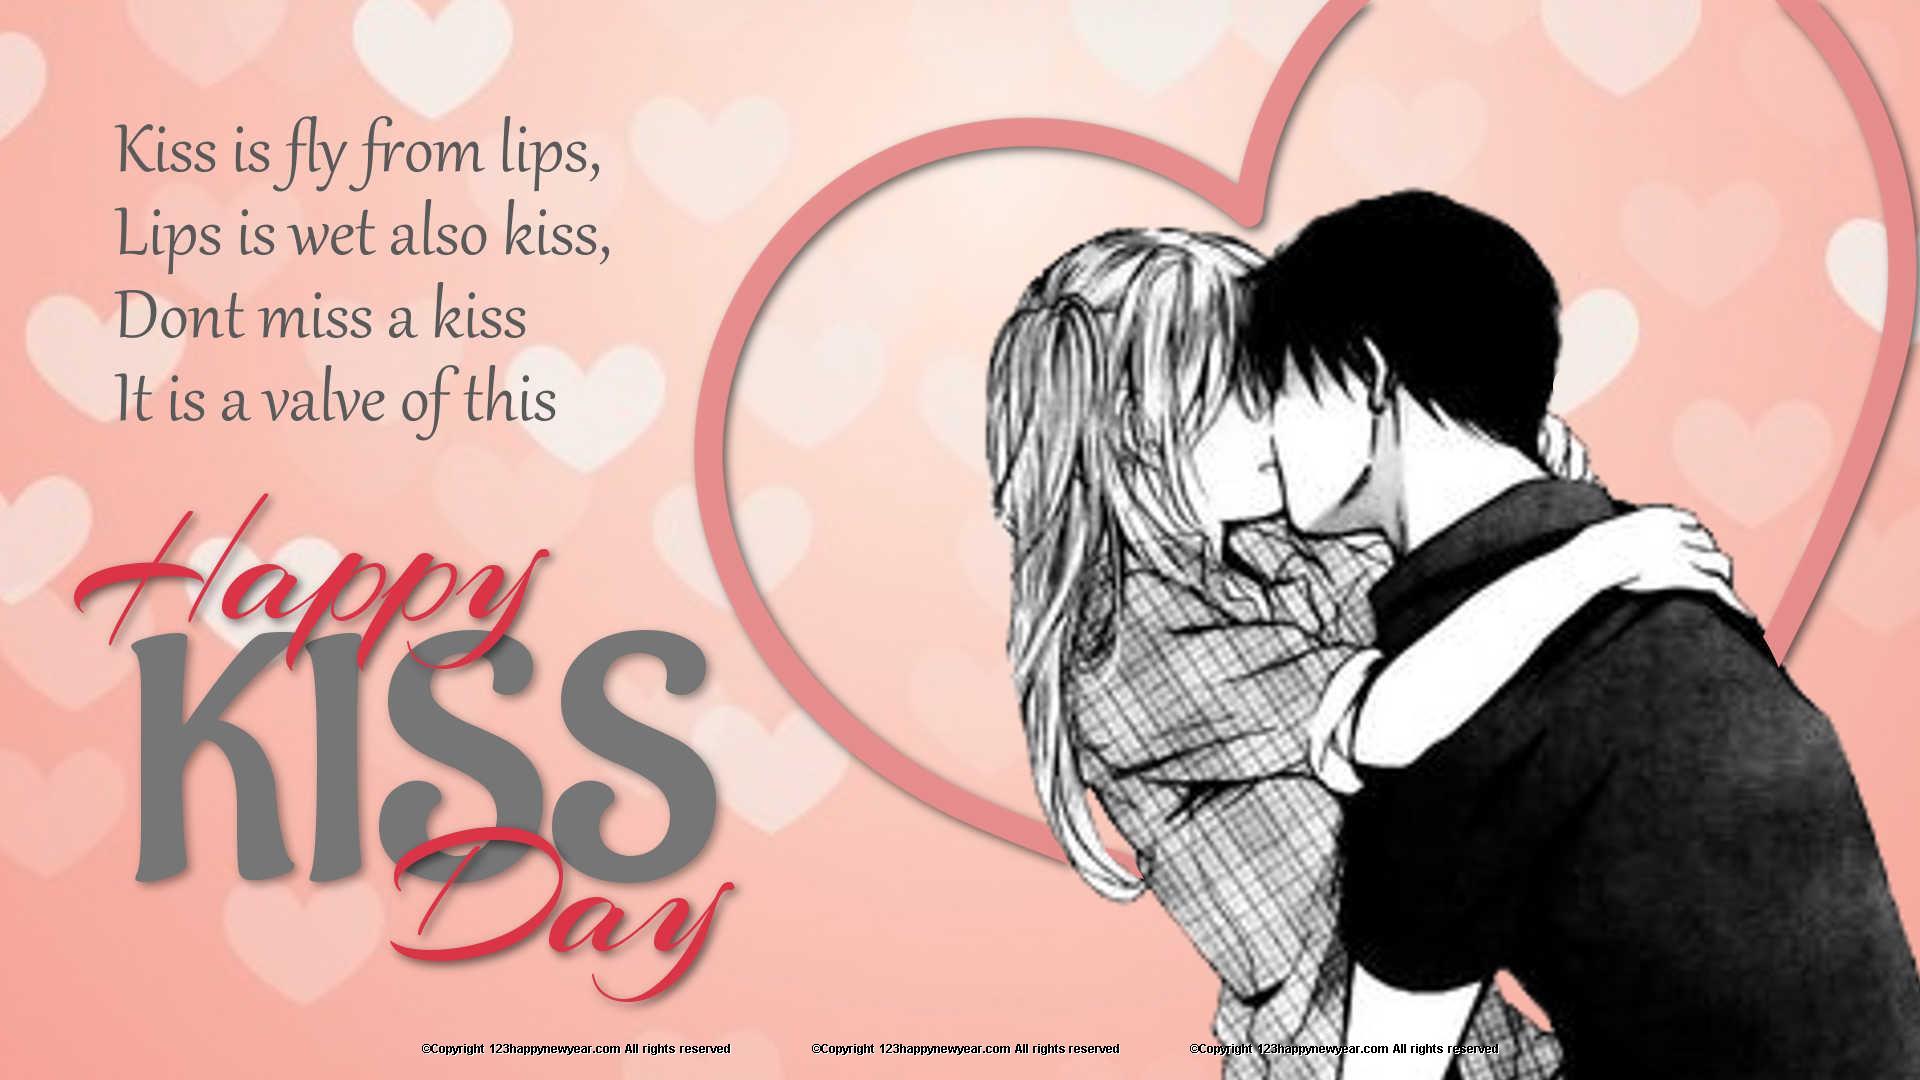 Happy kiss day wallpaper free download